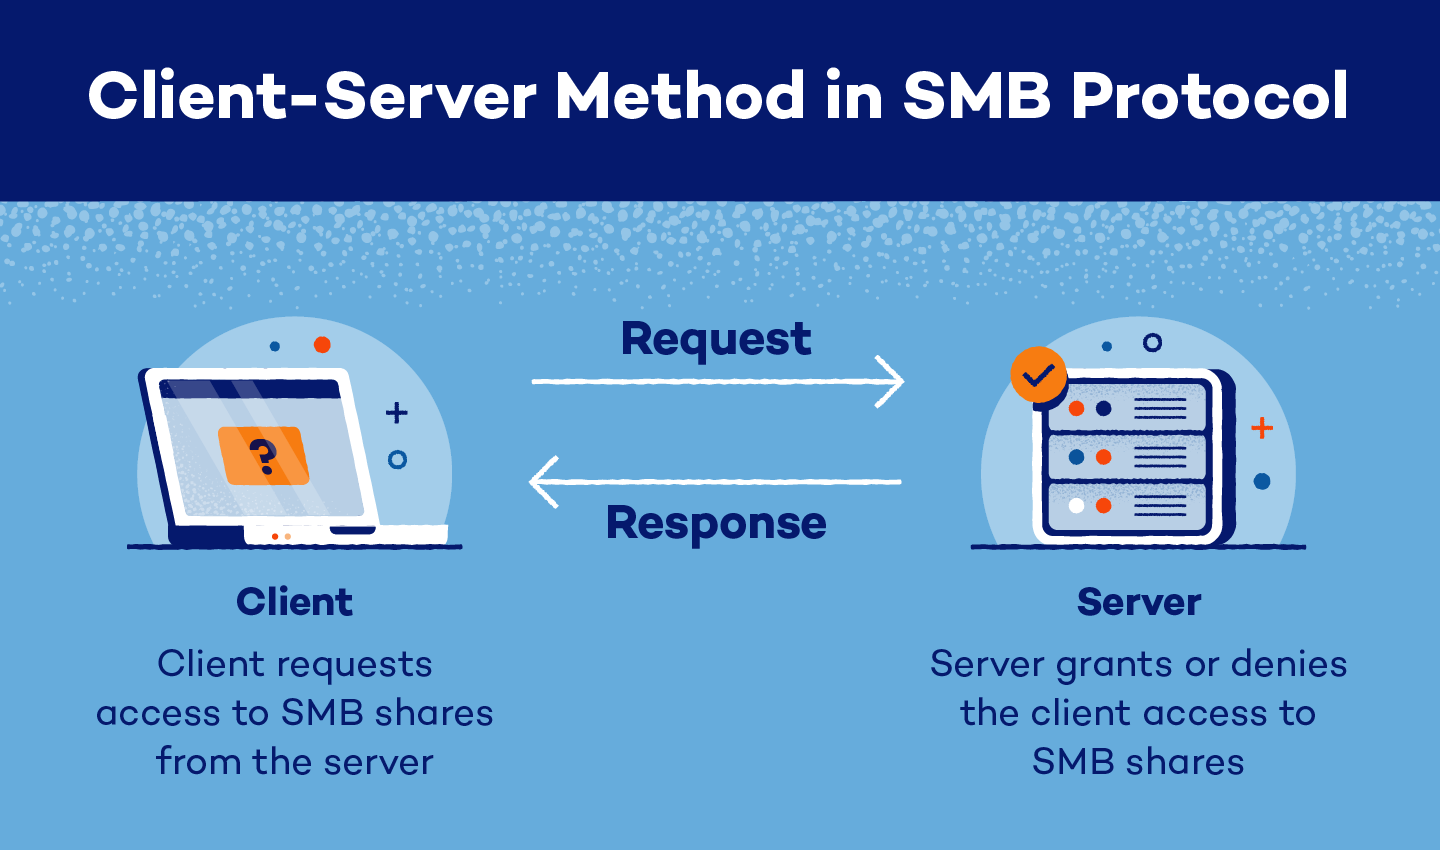 Client-server request-response method in SMB protocol